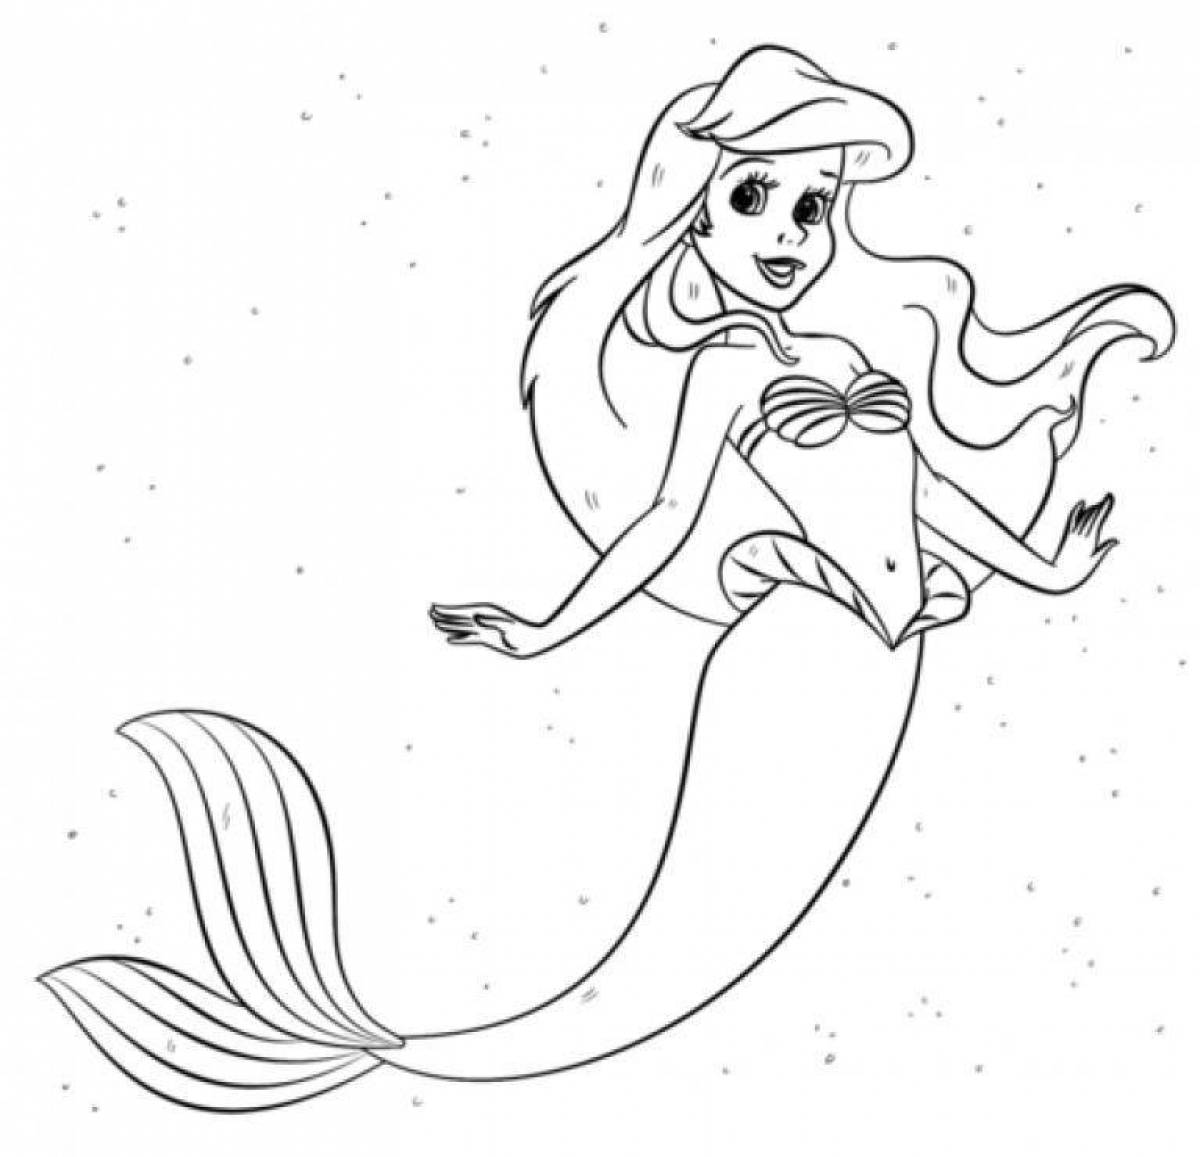 Shining ariel coloring book for kids